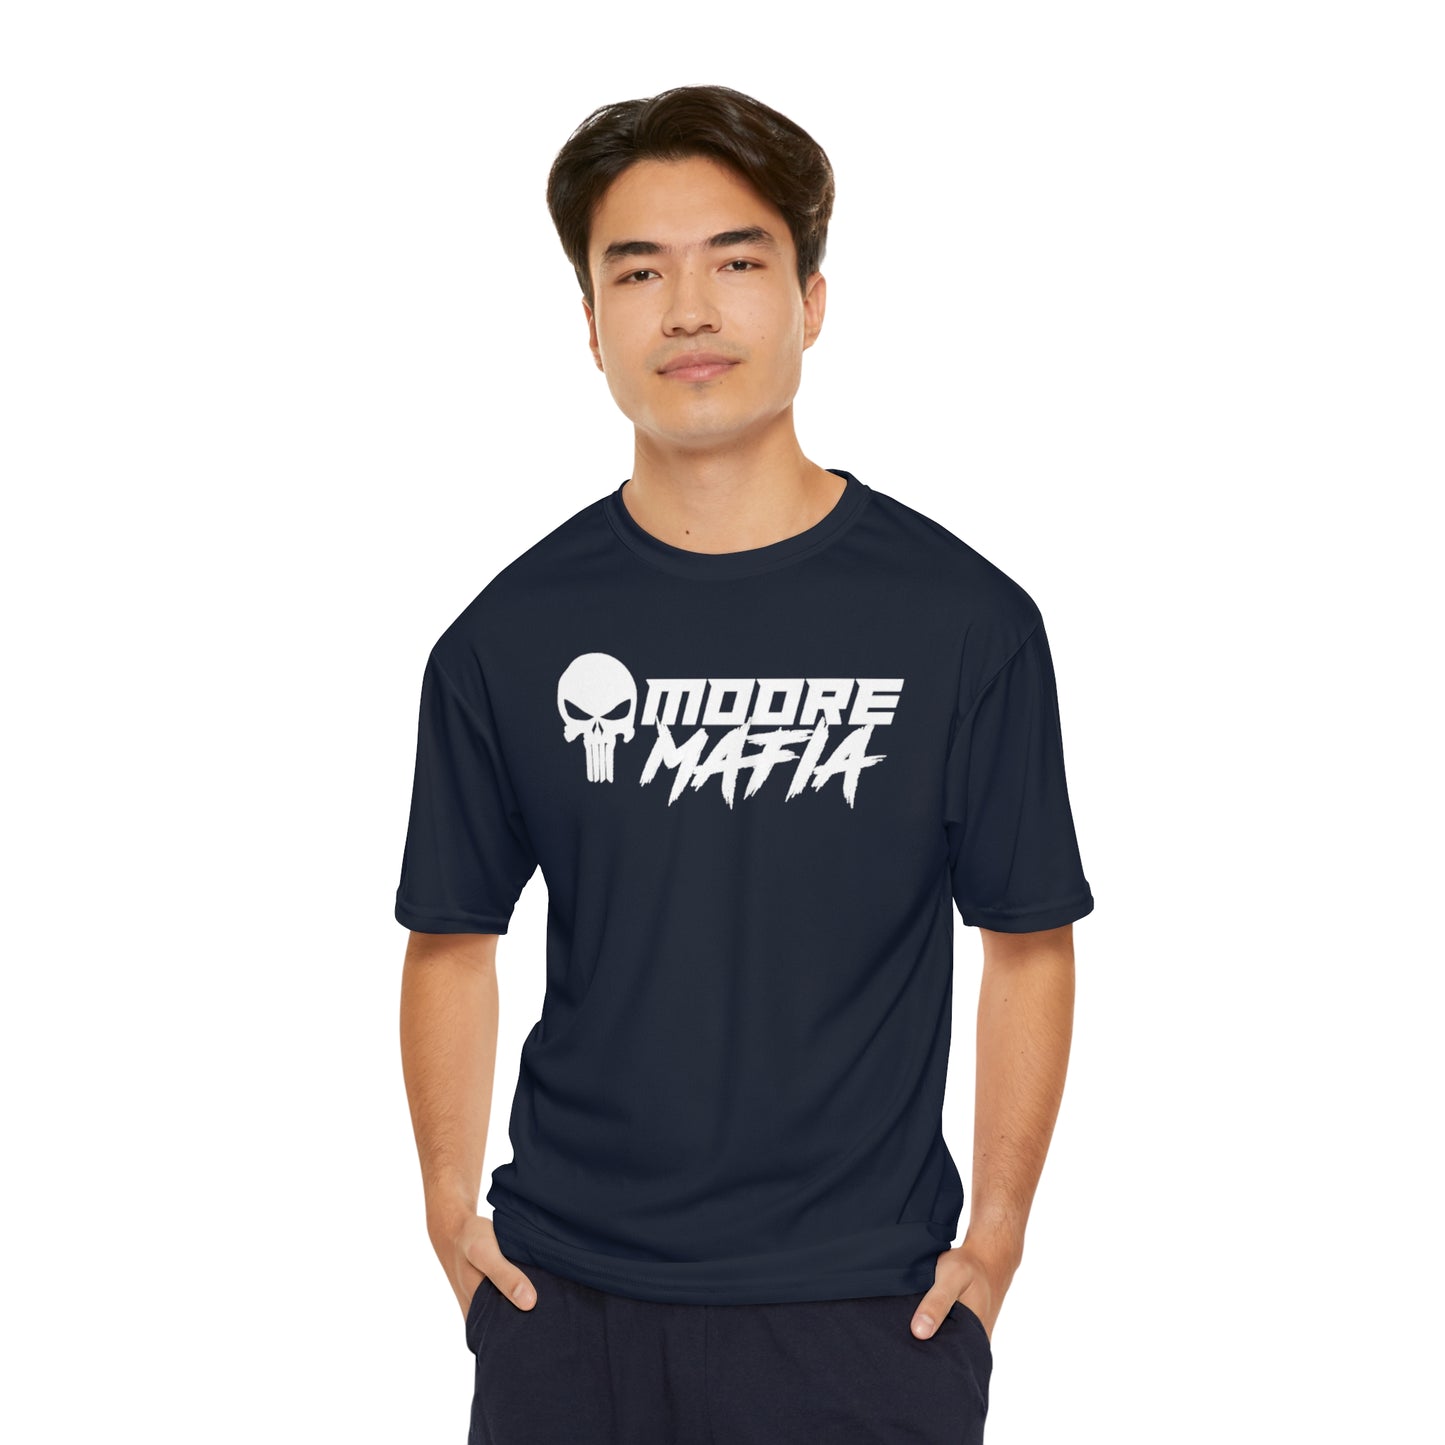 Life Without Beer And Motorcycles Performance T-Shirt